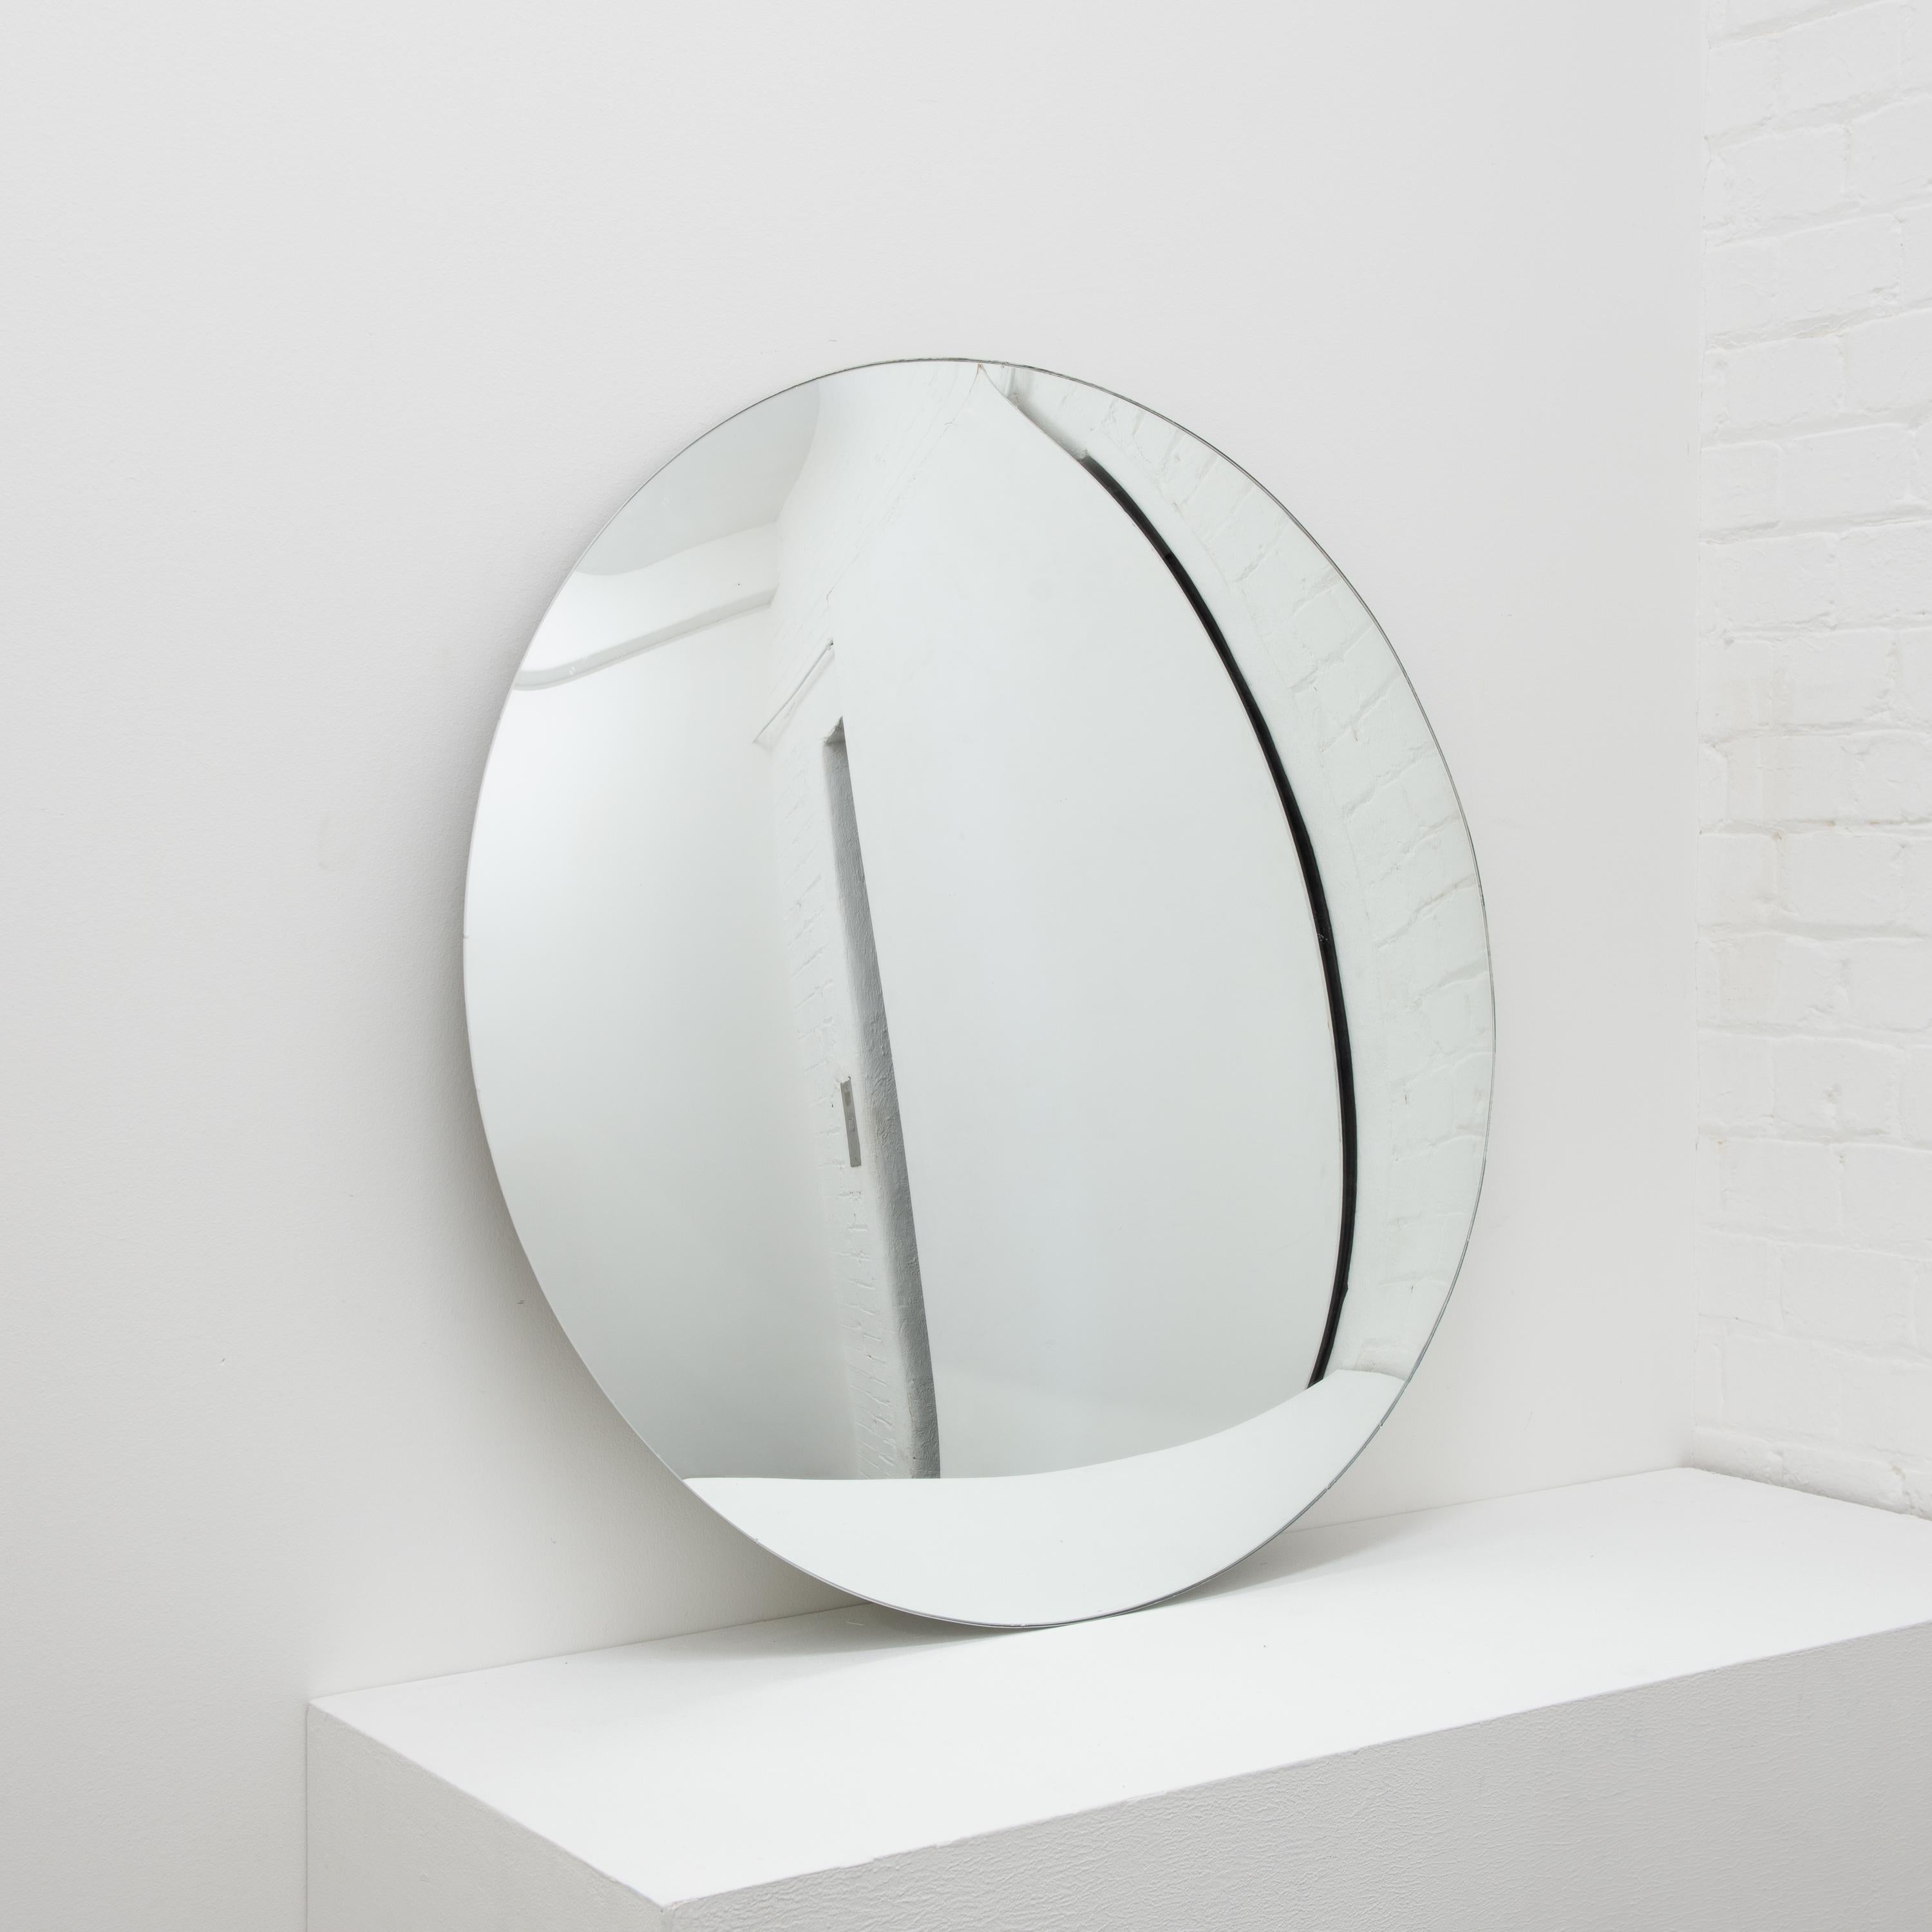 Minimalist frameless convex mirror.

Each Orbis™ convex mirror is designed and handcrafted in London, UK. Slight variations in sizes and imperfections on edges and surface finishes are characteristics of such original handmade creations. These